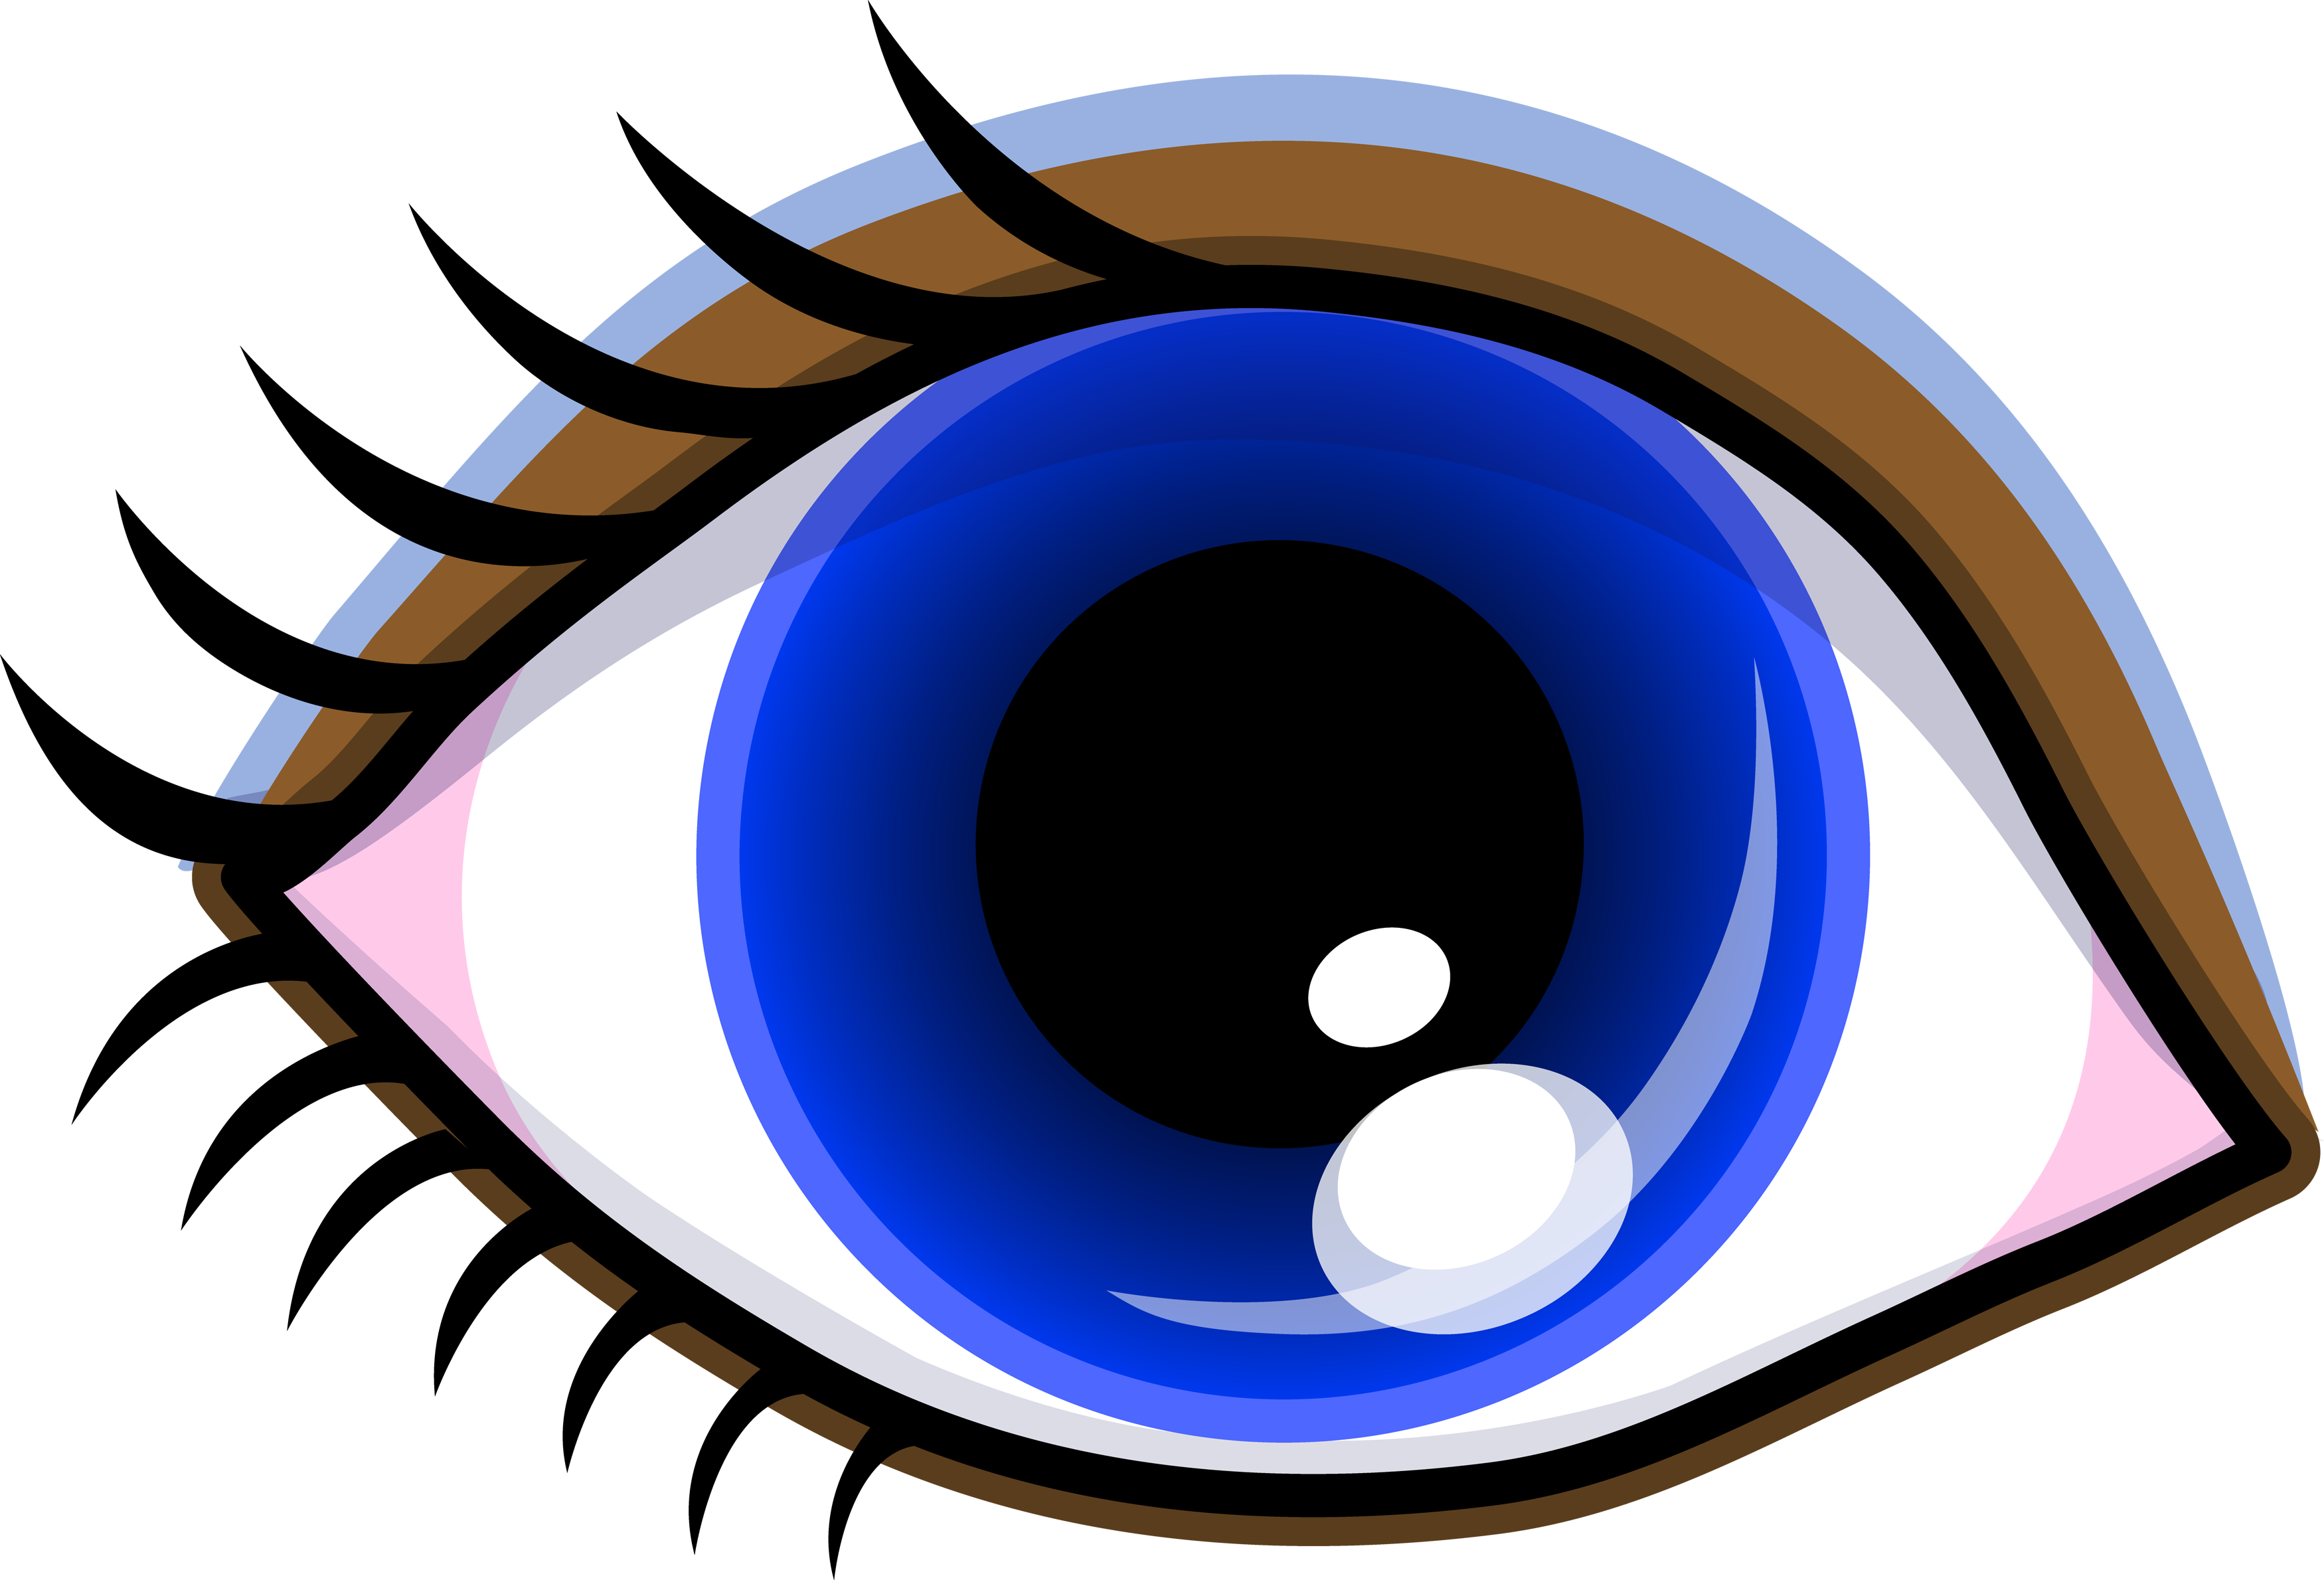 Free Cartoon Eye Image, Download Free Clip Art, Free Clip Art on Clipart Library